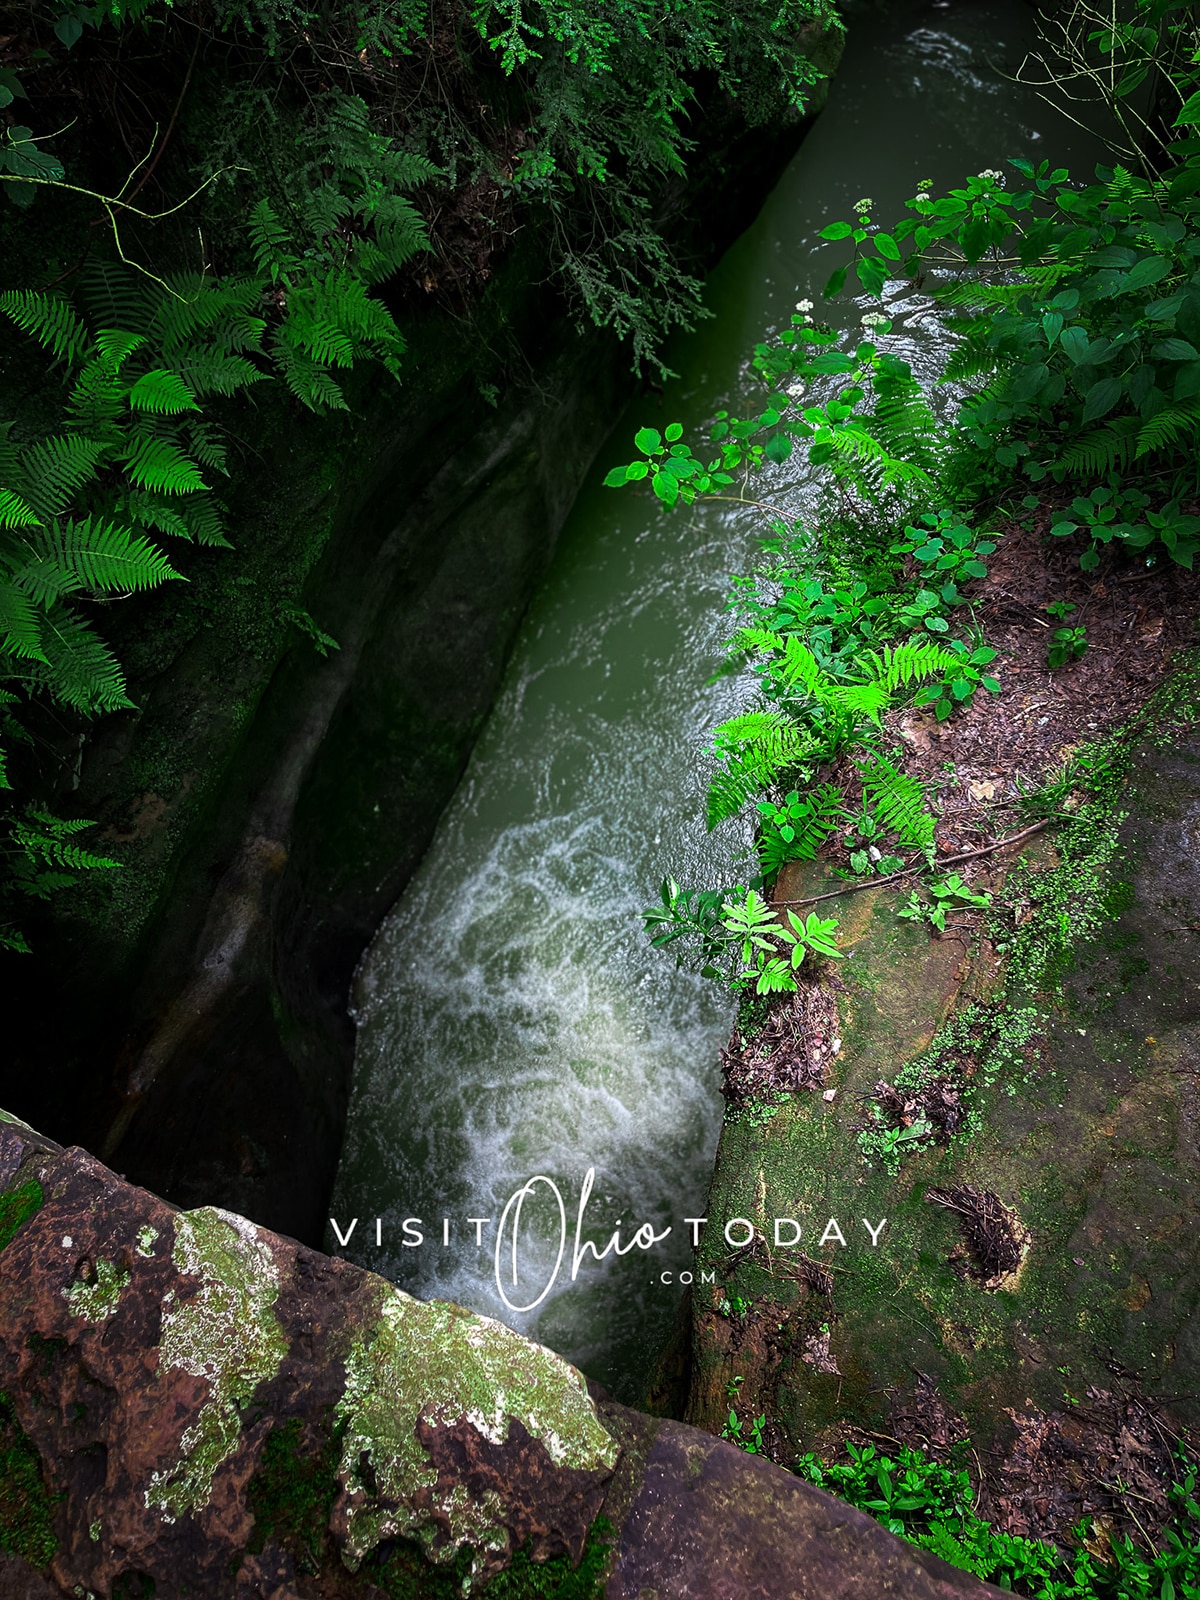 horizontal photo showing the water running from Devils Bathtub Hocking Hills with foliage on both banks